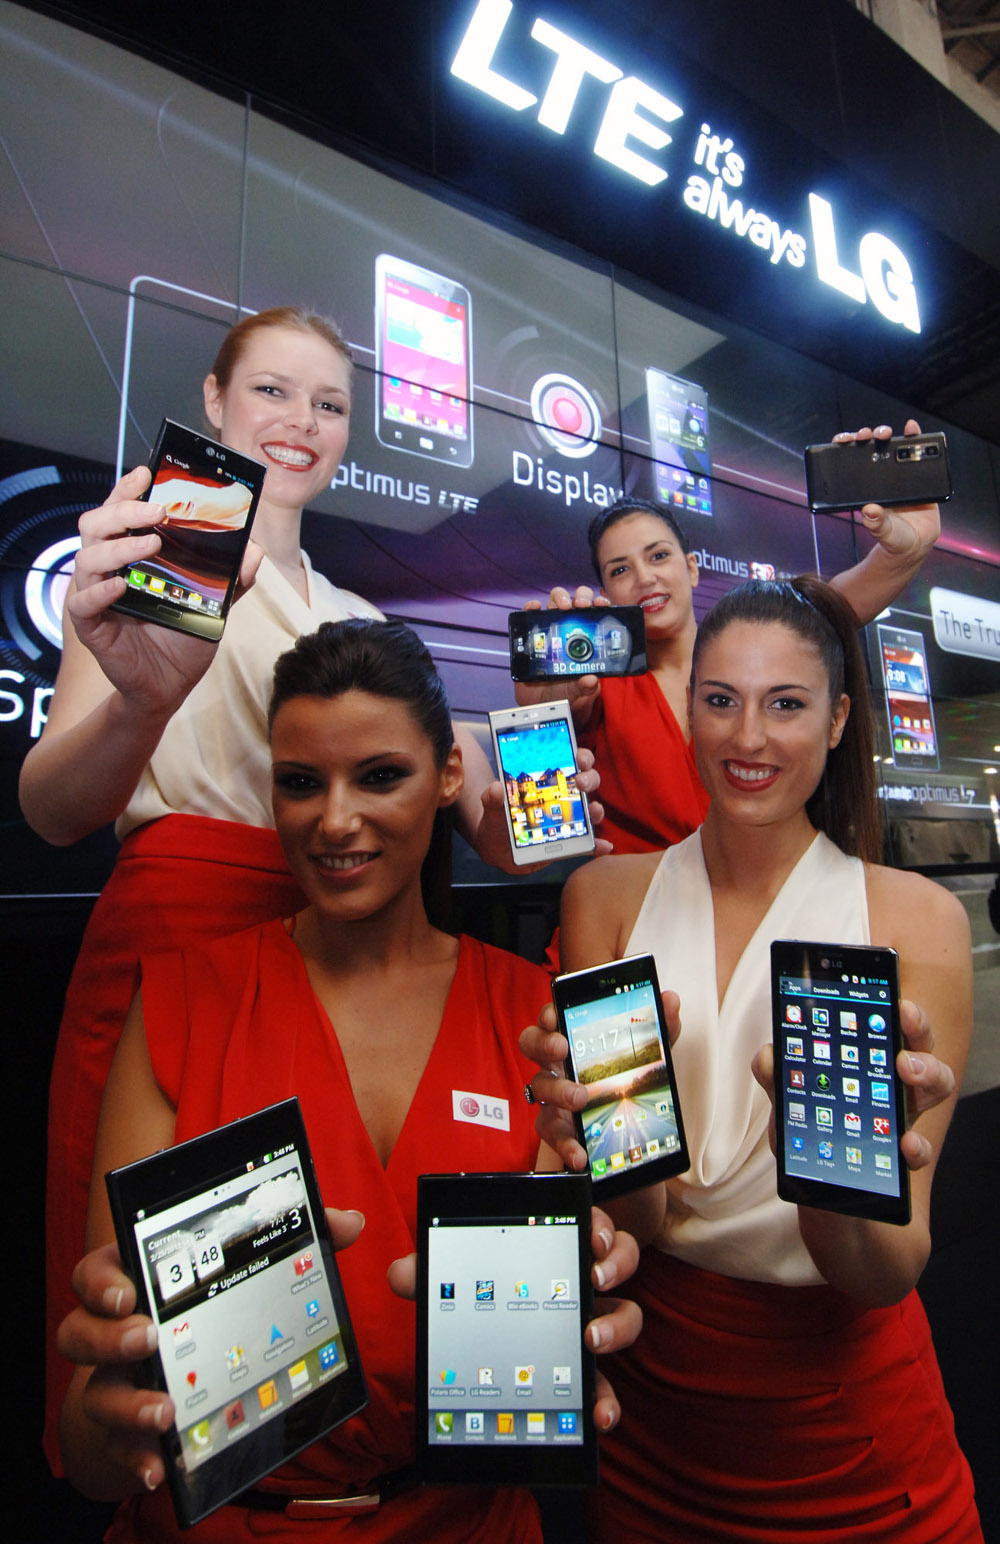 Another image of four female models holding eight LG LTE smartphones at MWC 2012